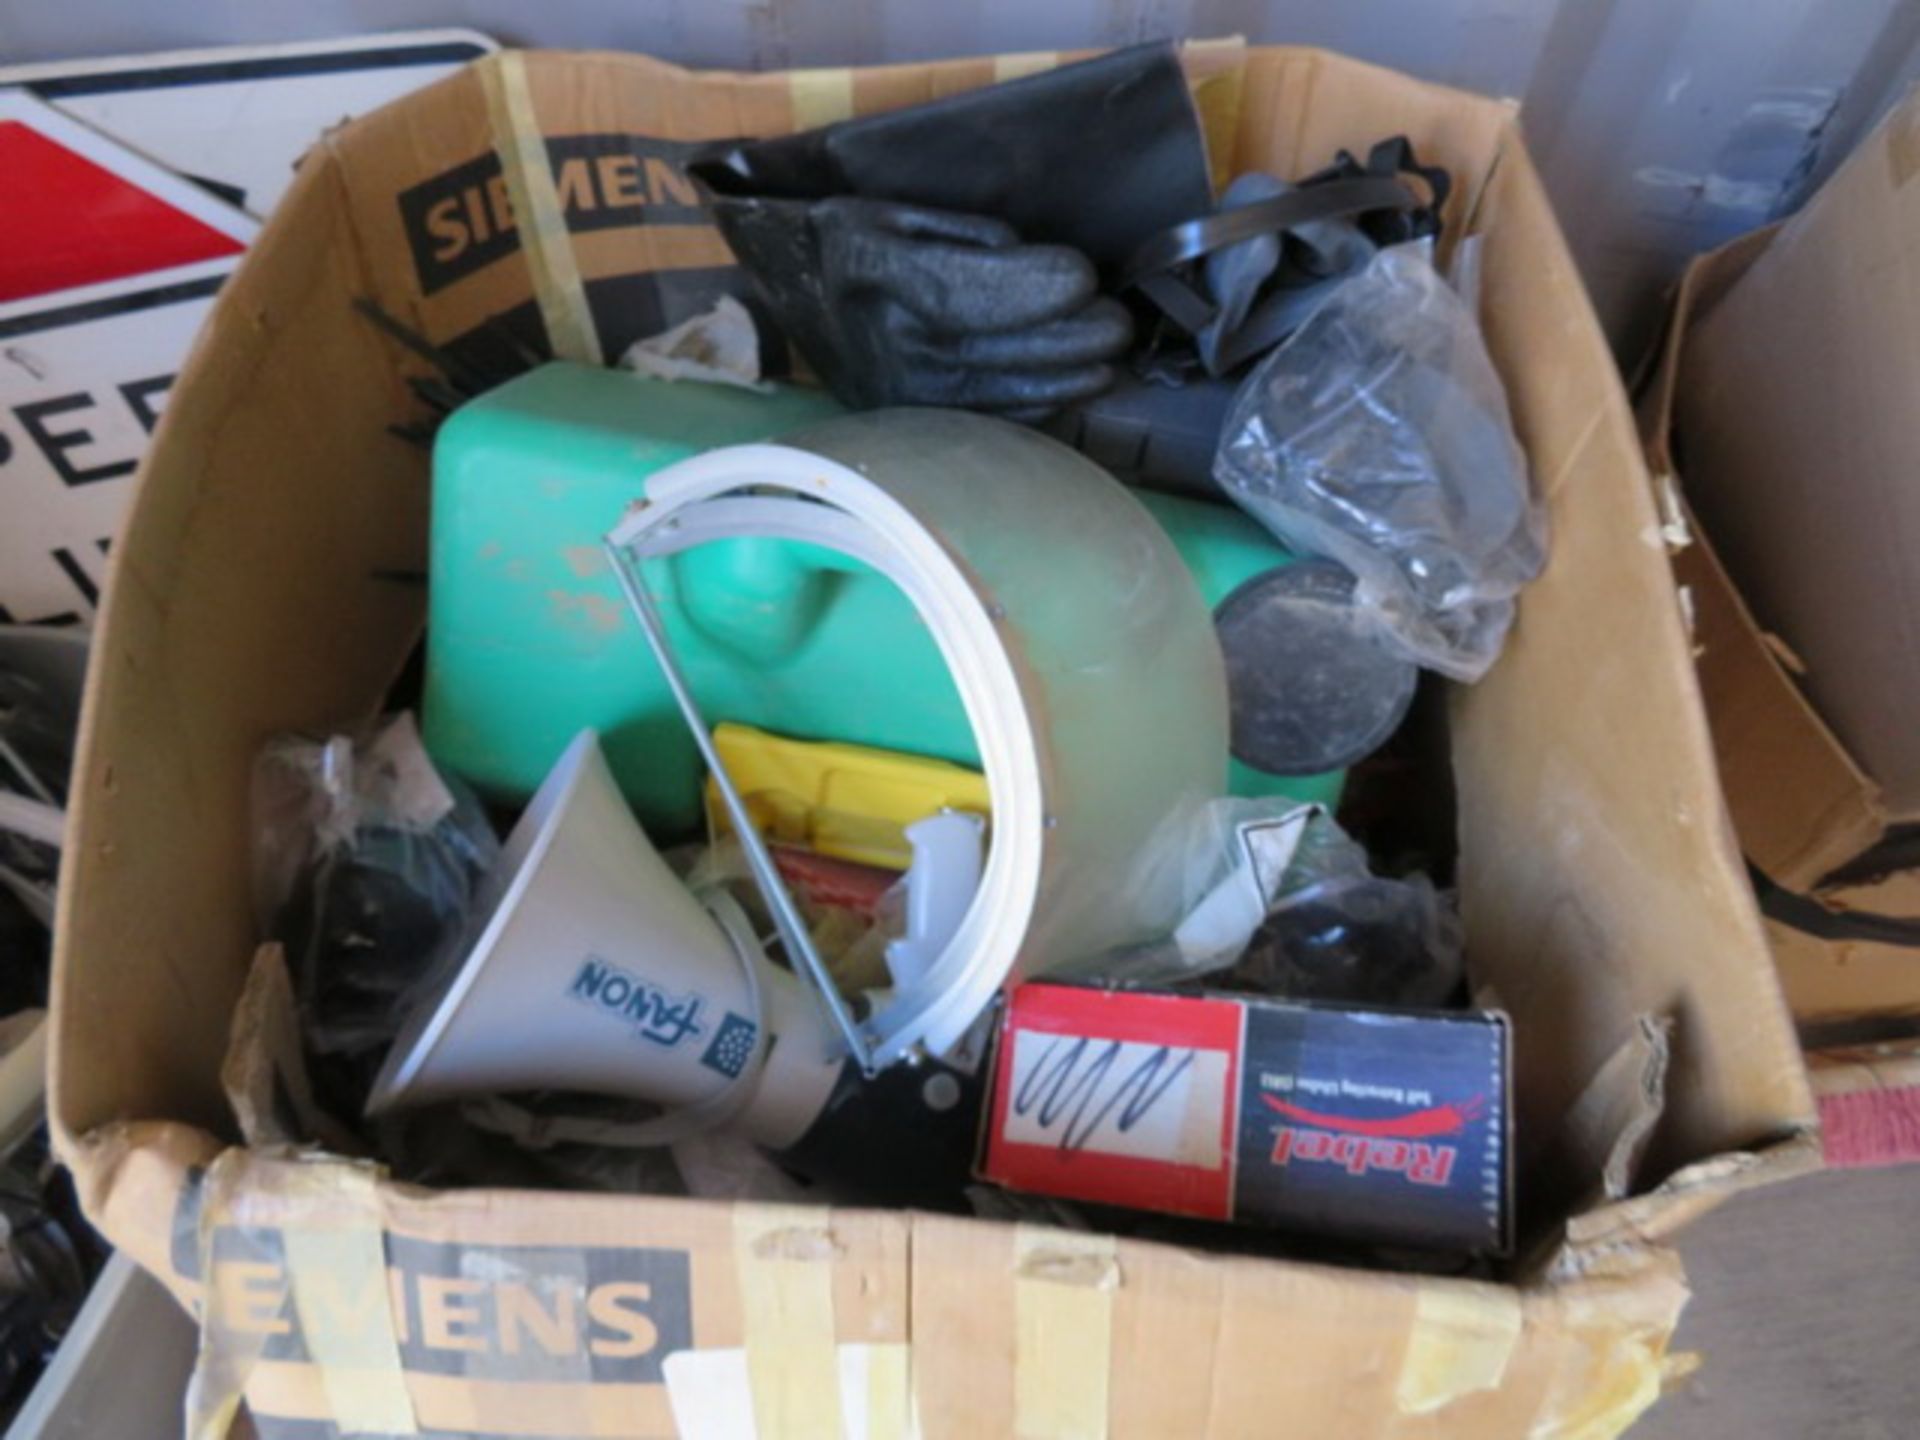 Contents of Shipping Container. To Include 1/2" PVDF Tubing, Safety Glasses, Safety Signs, - Image 5 of 51